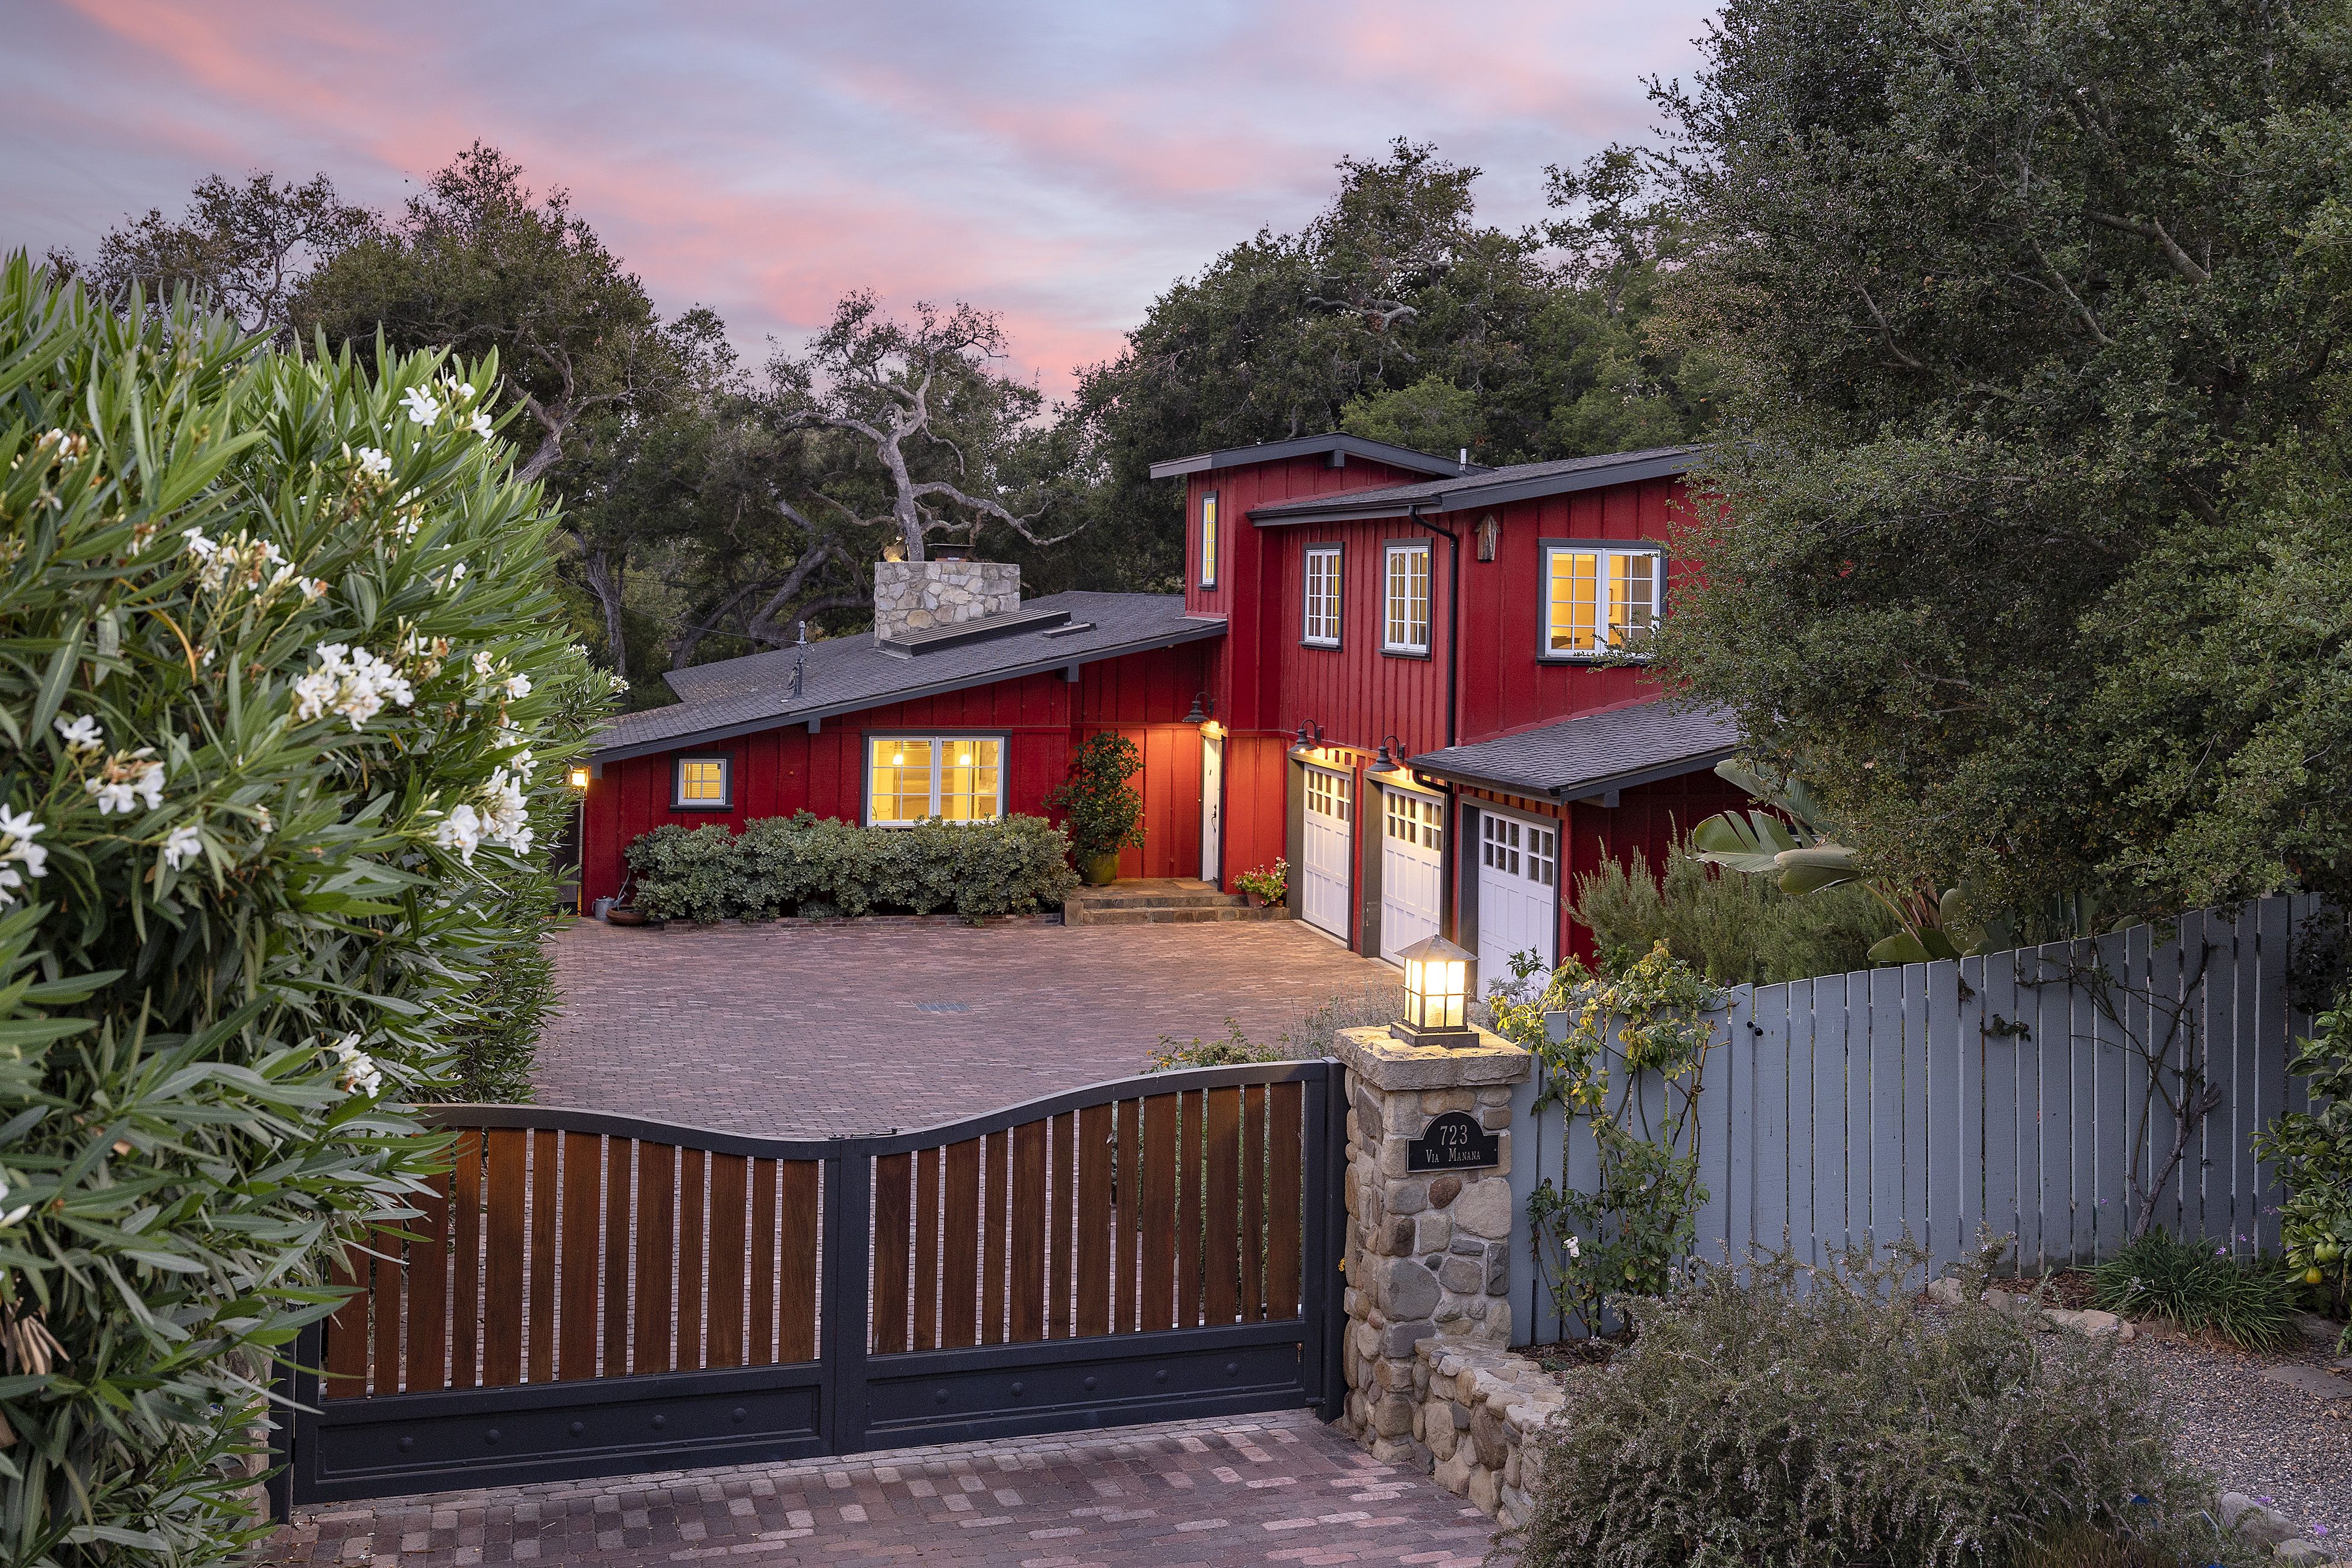 Beautiful red farmhouse nestled in trees, for sale in Santa Barbara